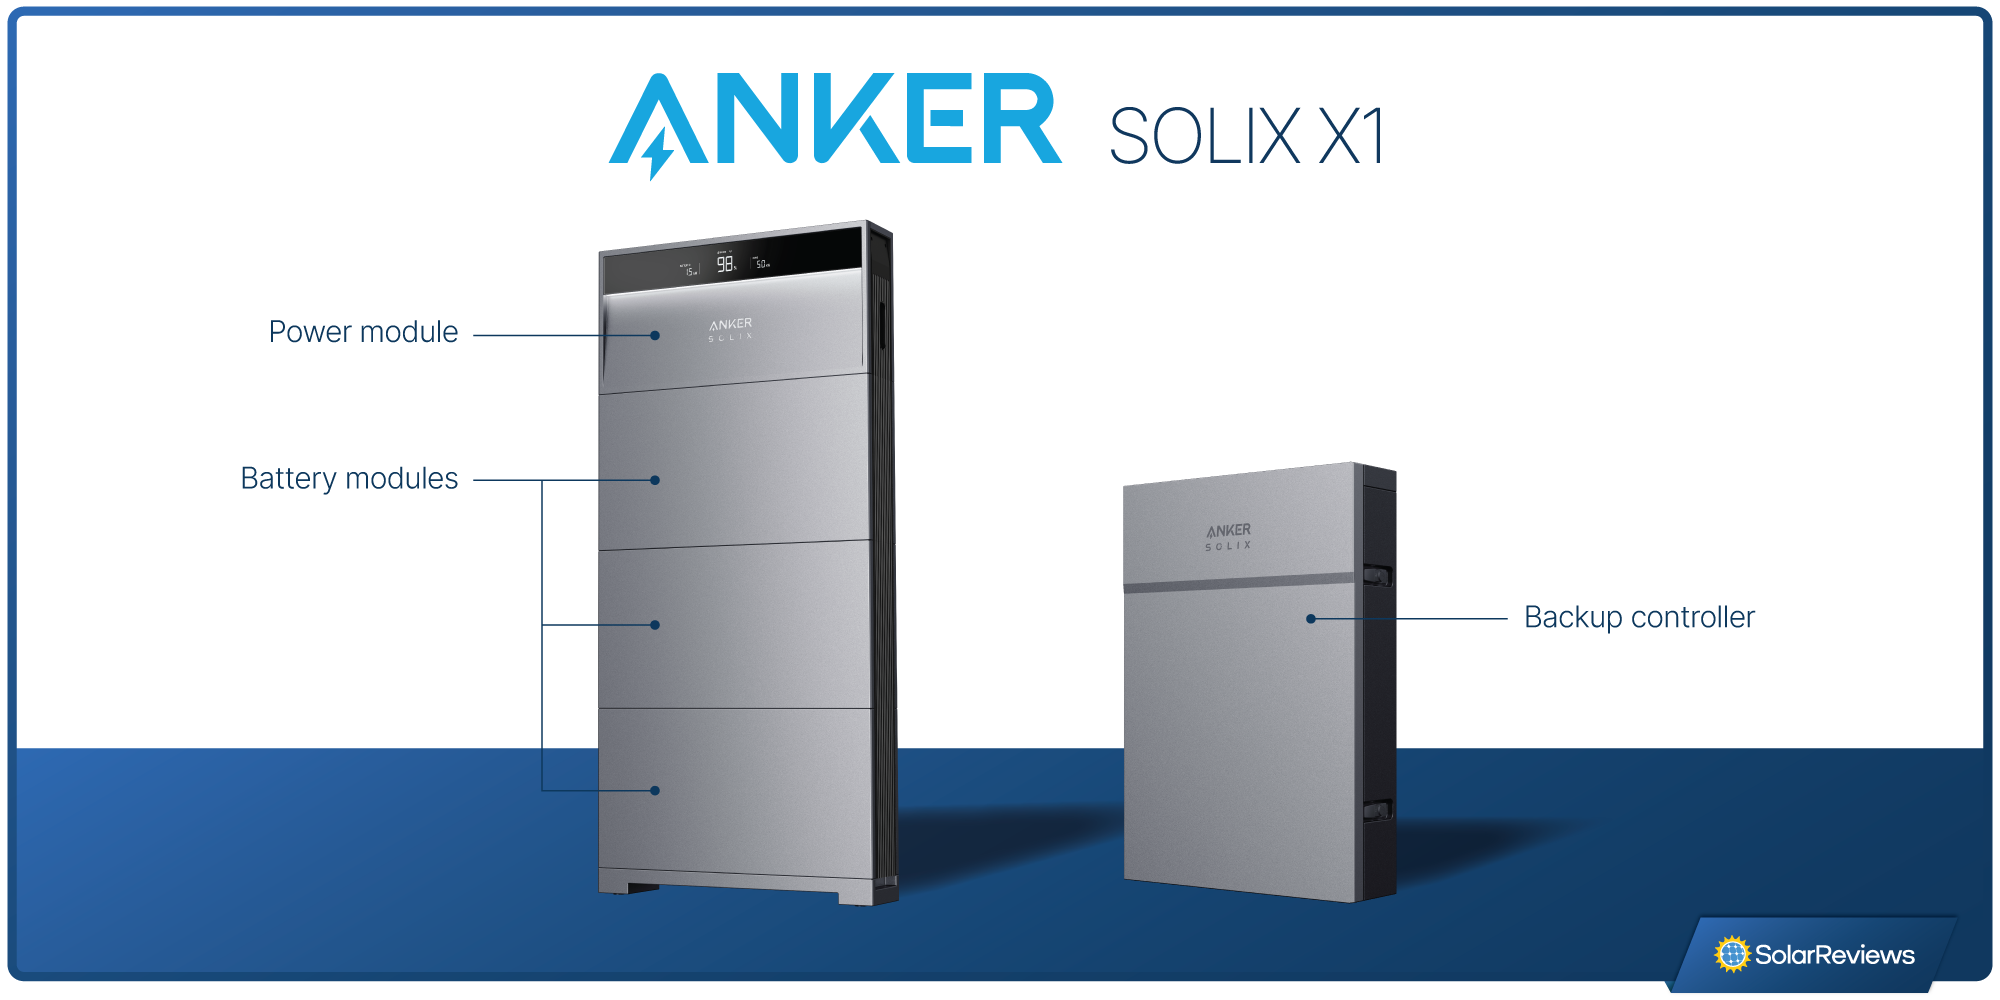 An image showing the three main components of the Anker SOLIX X1 system